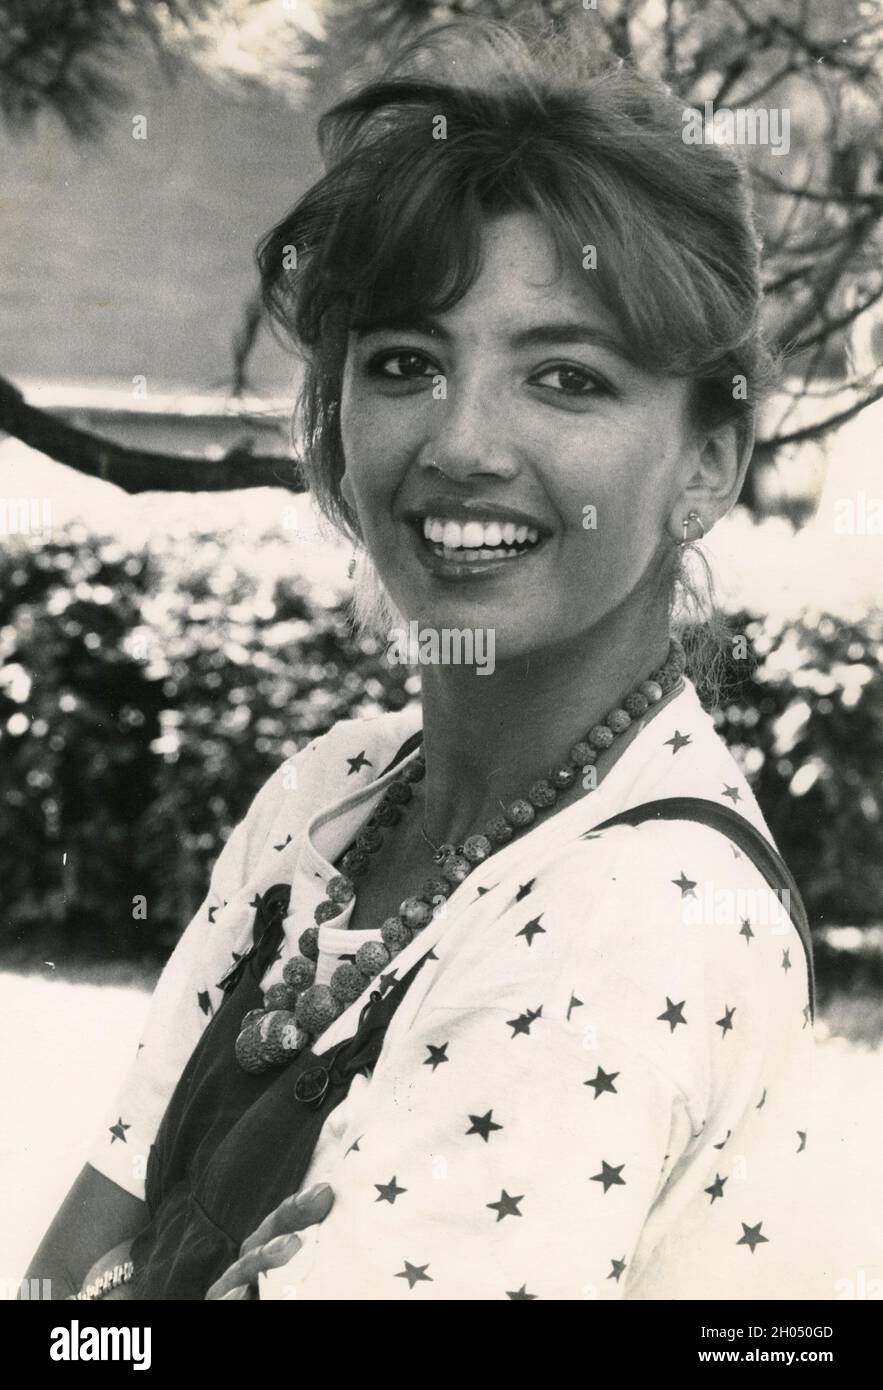 Italian television presenter, actress, and singer Milly Carlucci, 1980s Stock Photo